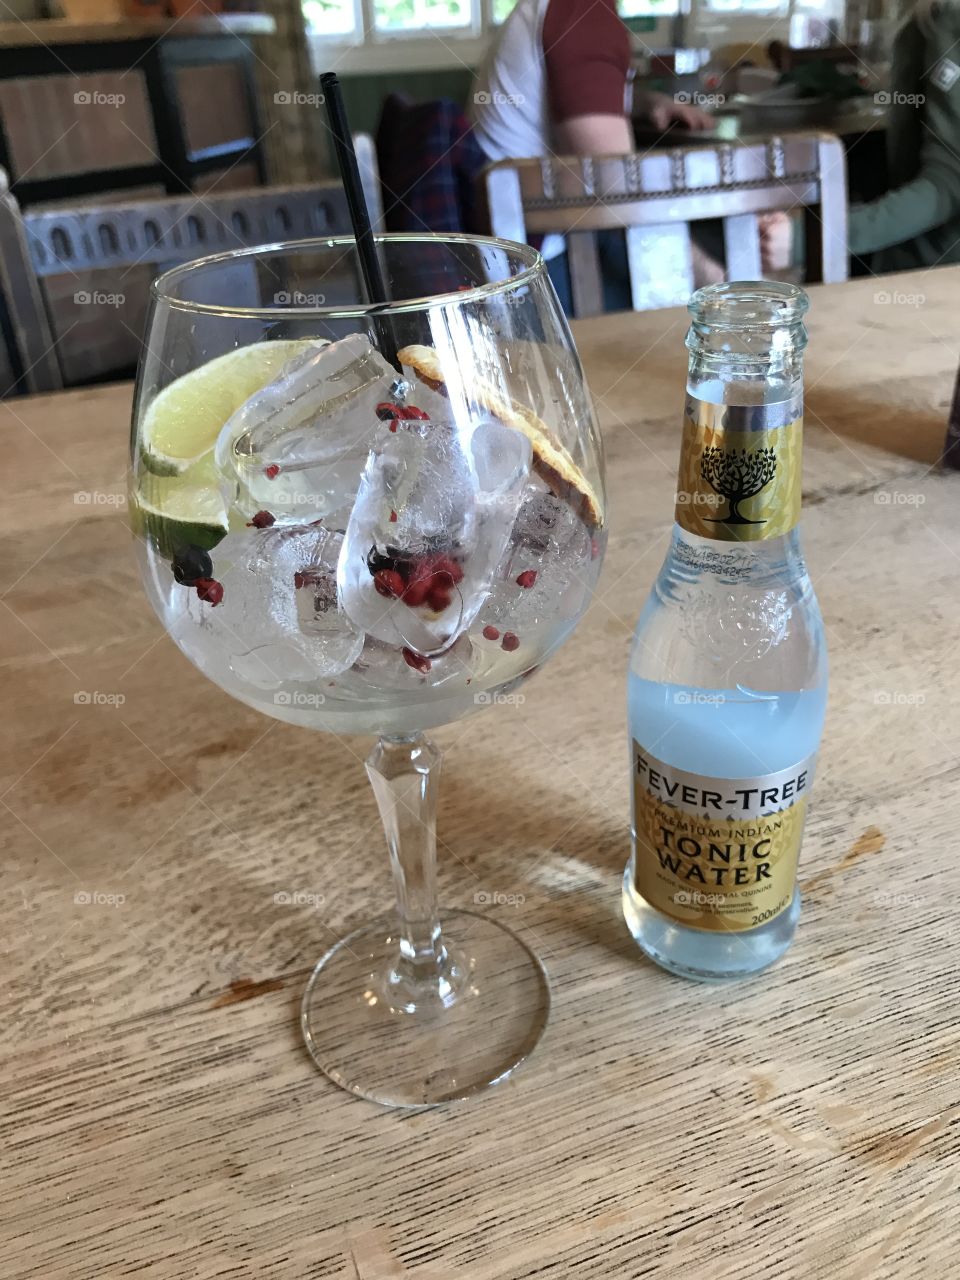 Gin and tonic, England, march 2017